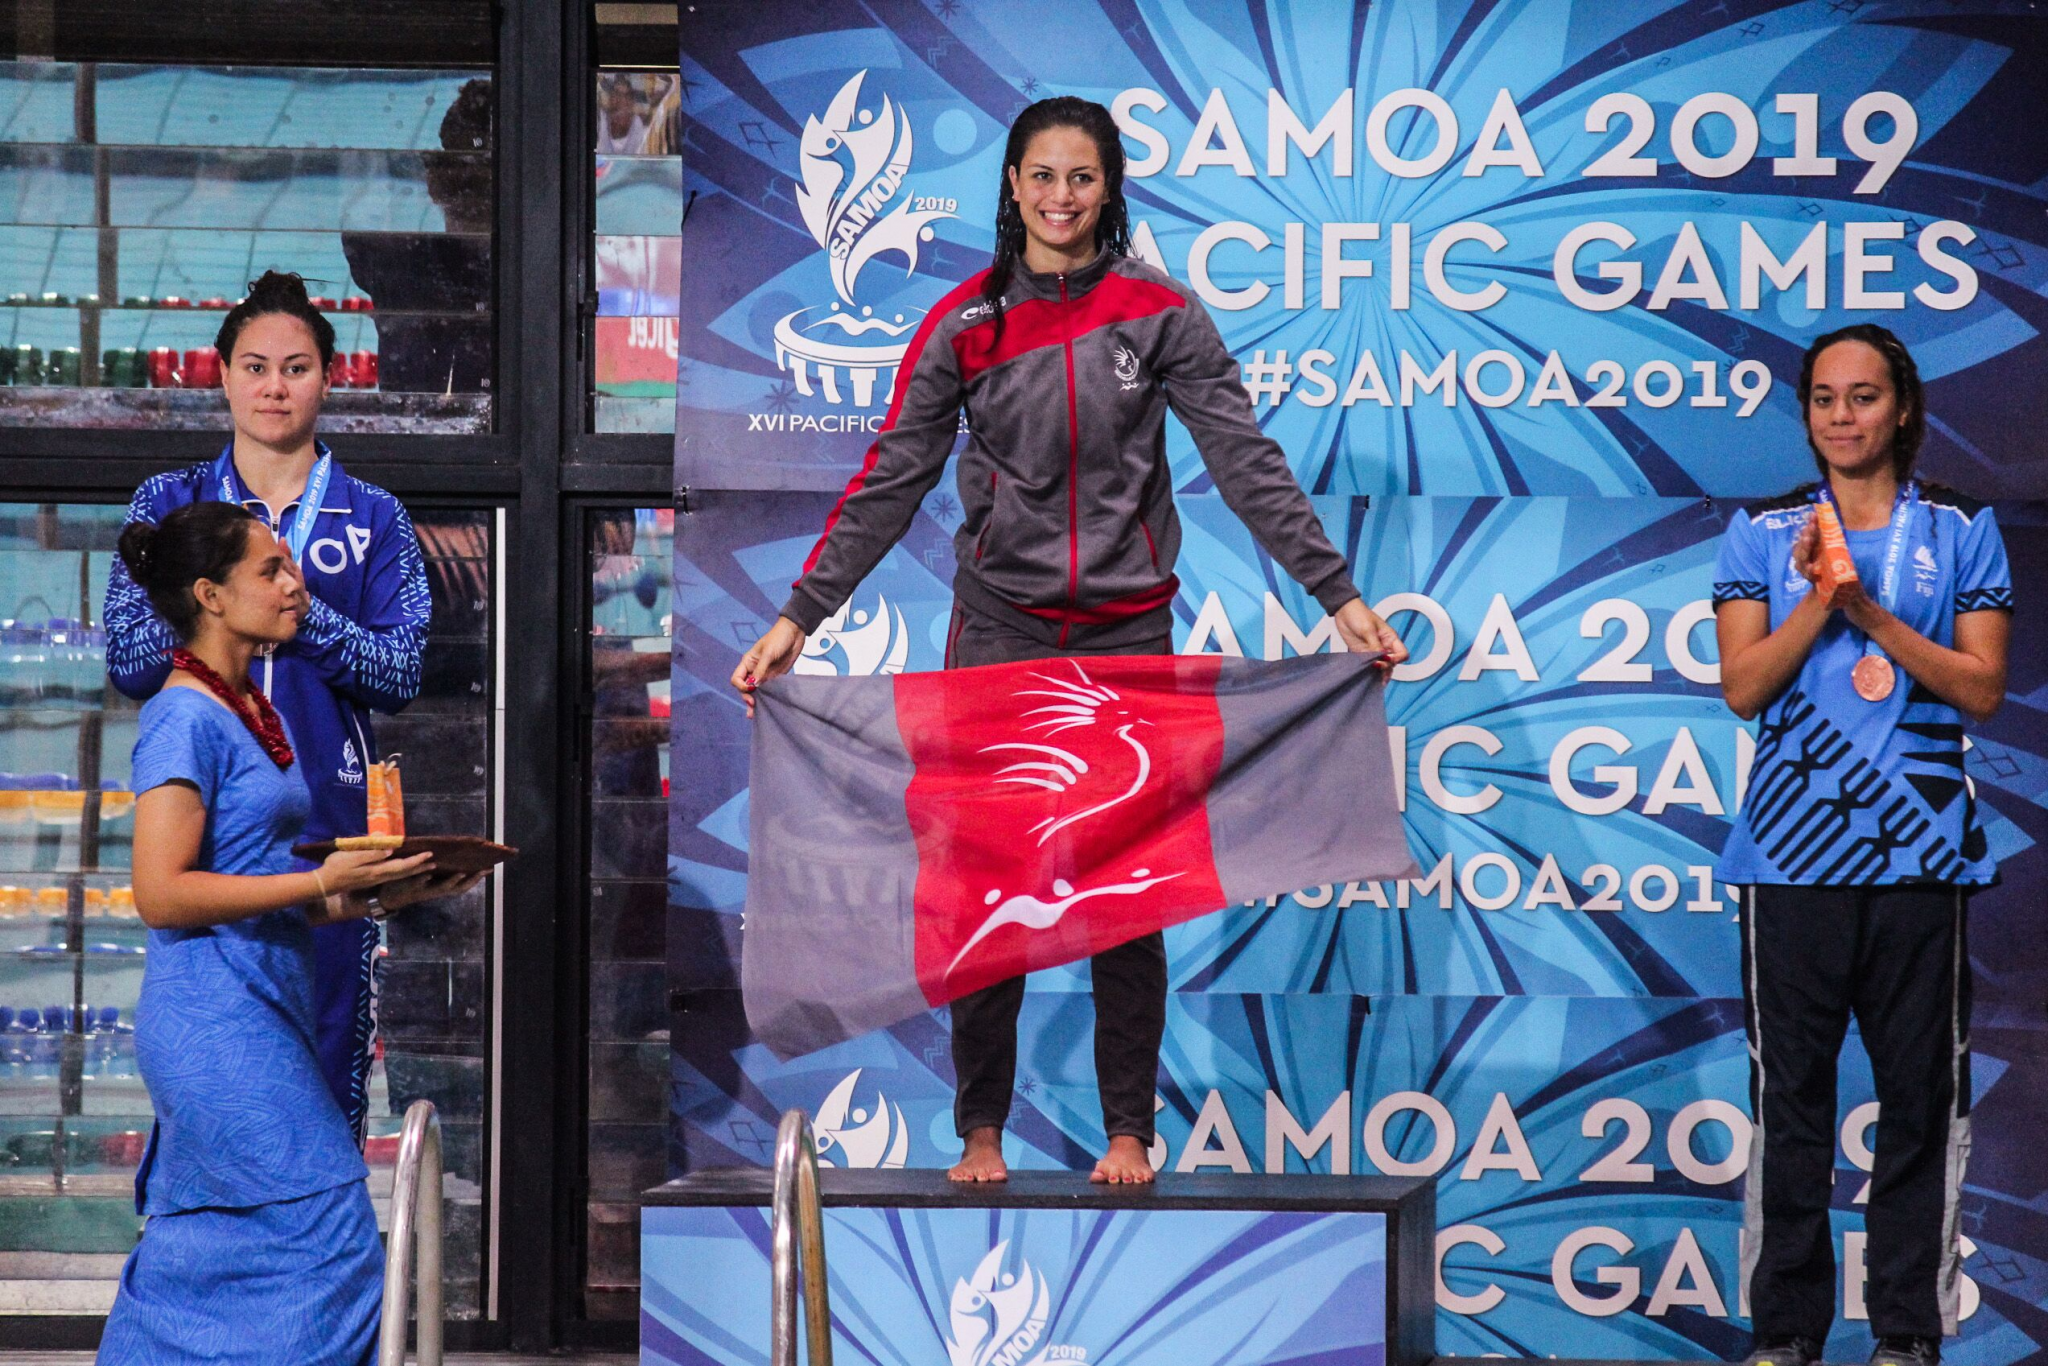 New Caledonia swimming star Emma Terebo was named best female athlete of Samoa 2019 ©Pacific Games News Service